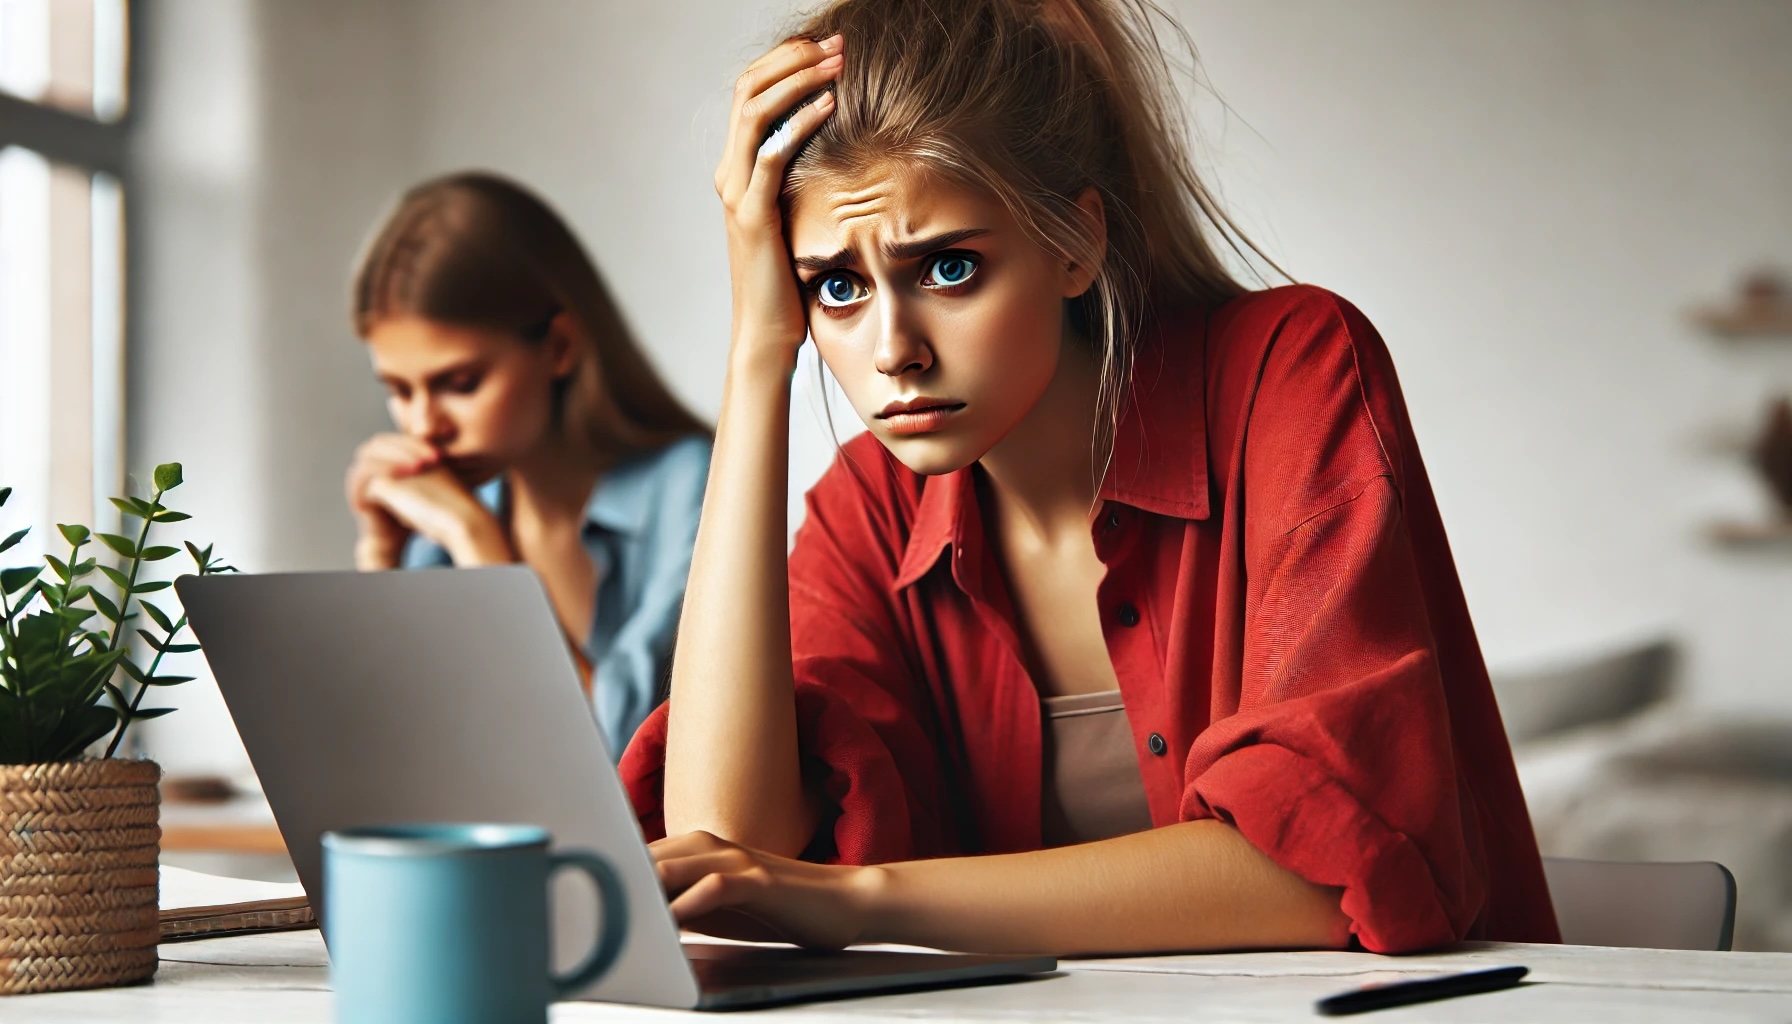 blond woman in red holding her head disconsolately staring at an open laptop